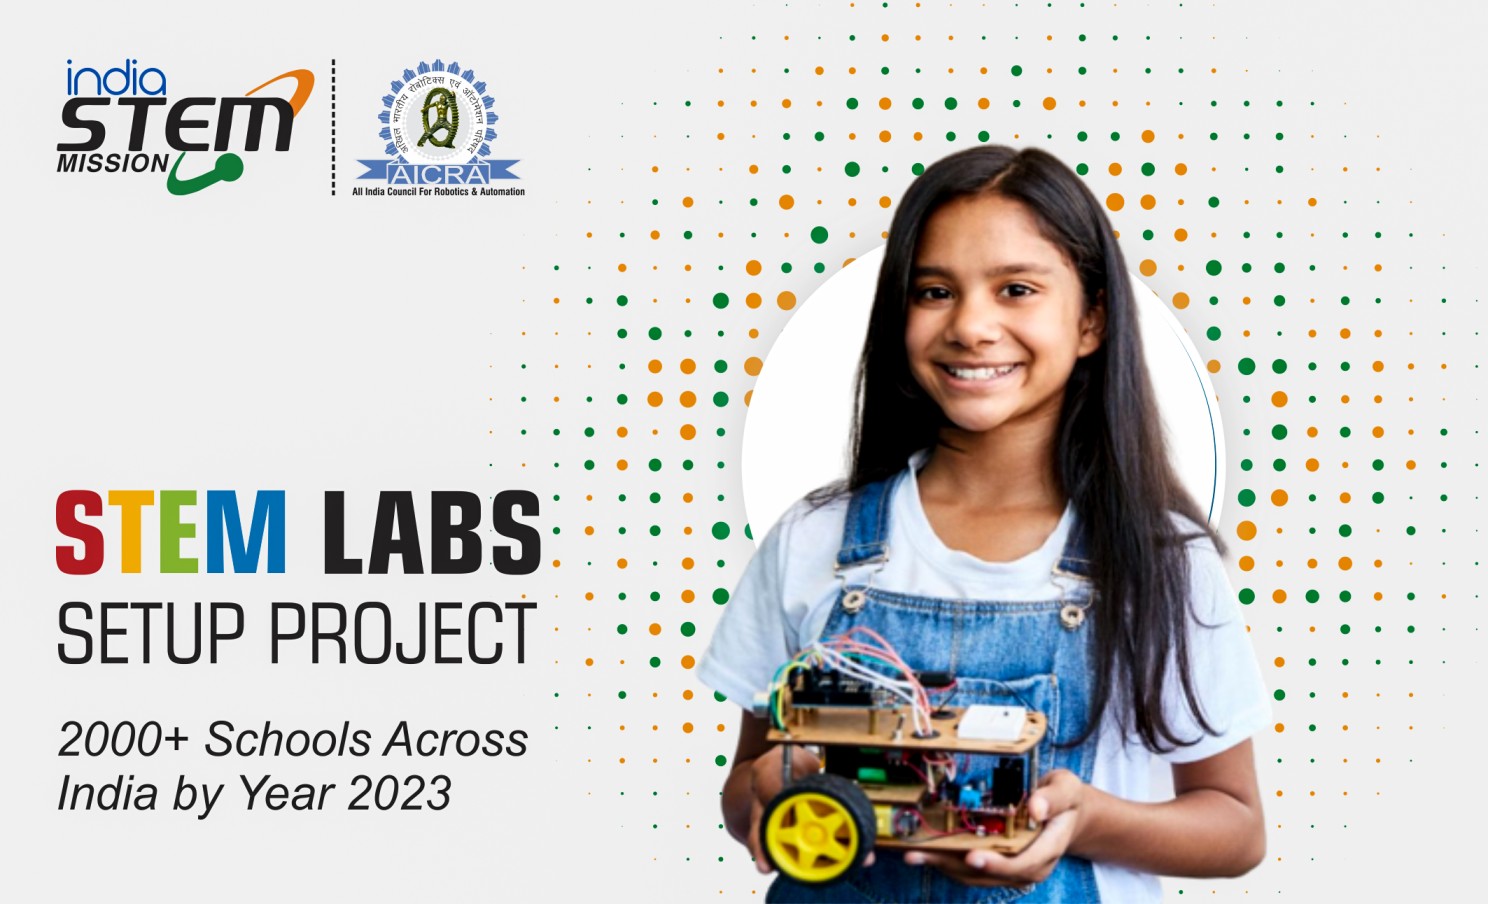 Setting up India STEM Labs across India